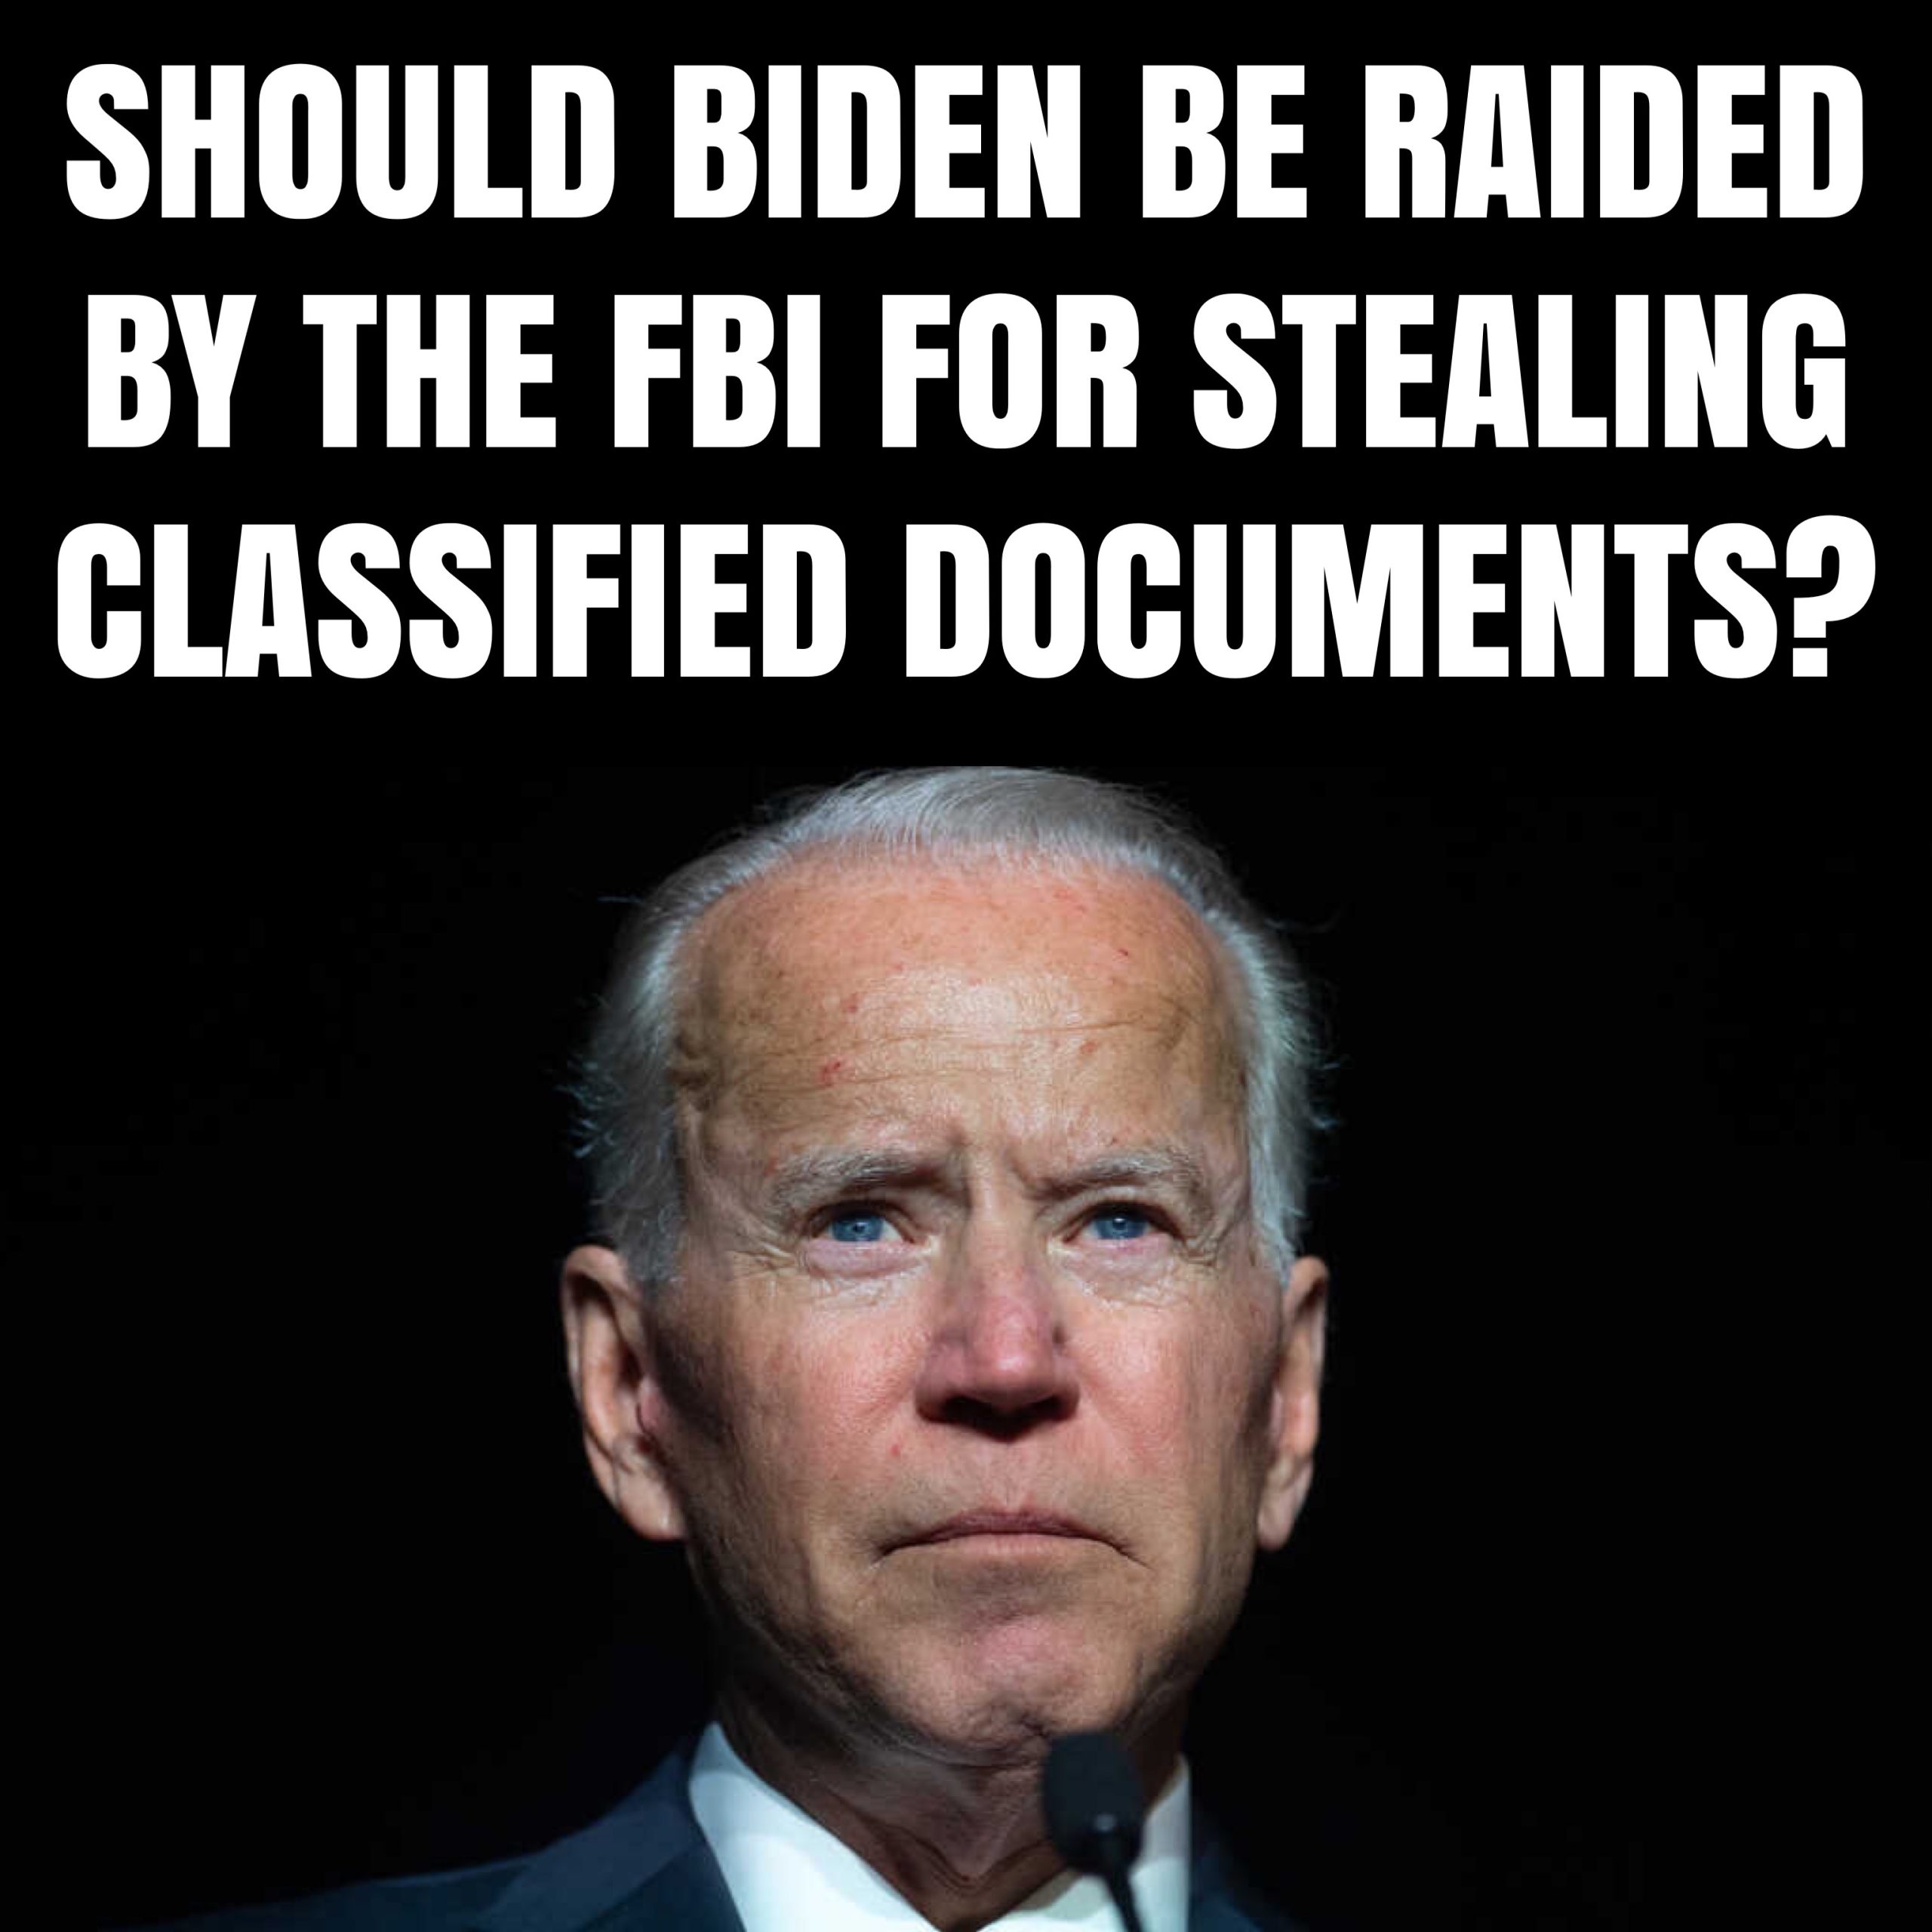 Background Check Form Claims Hunter Biden Paid $50,000 a Month in Rent for Biden Home Where Classified Docs Were Stored IMG_4090-scaled